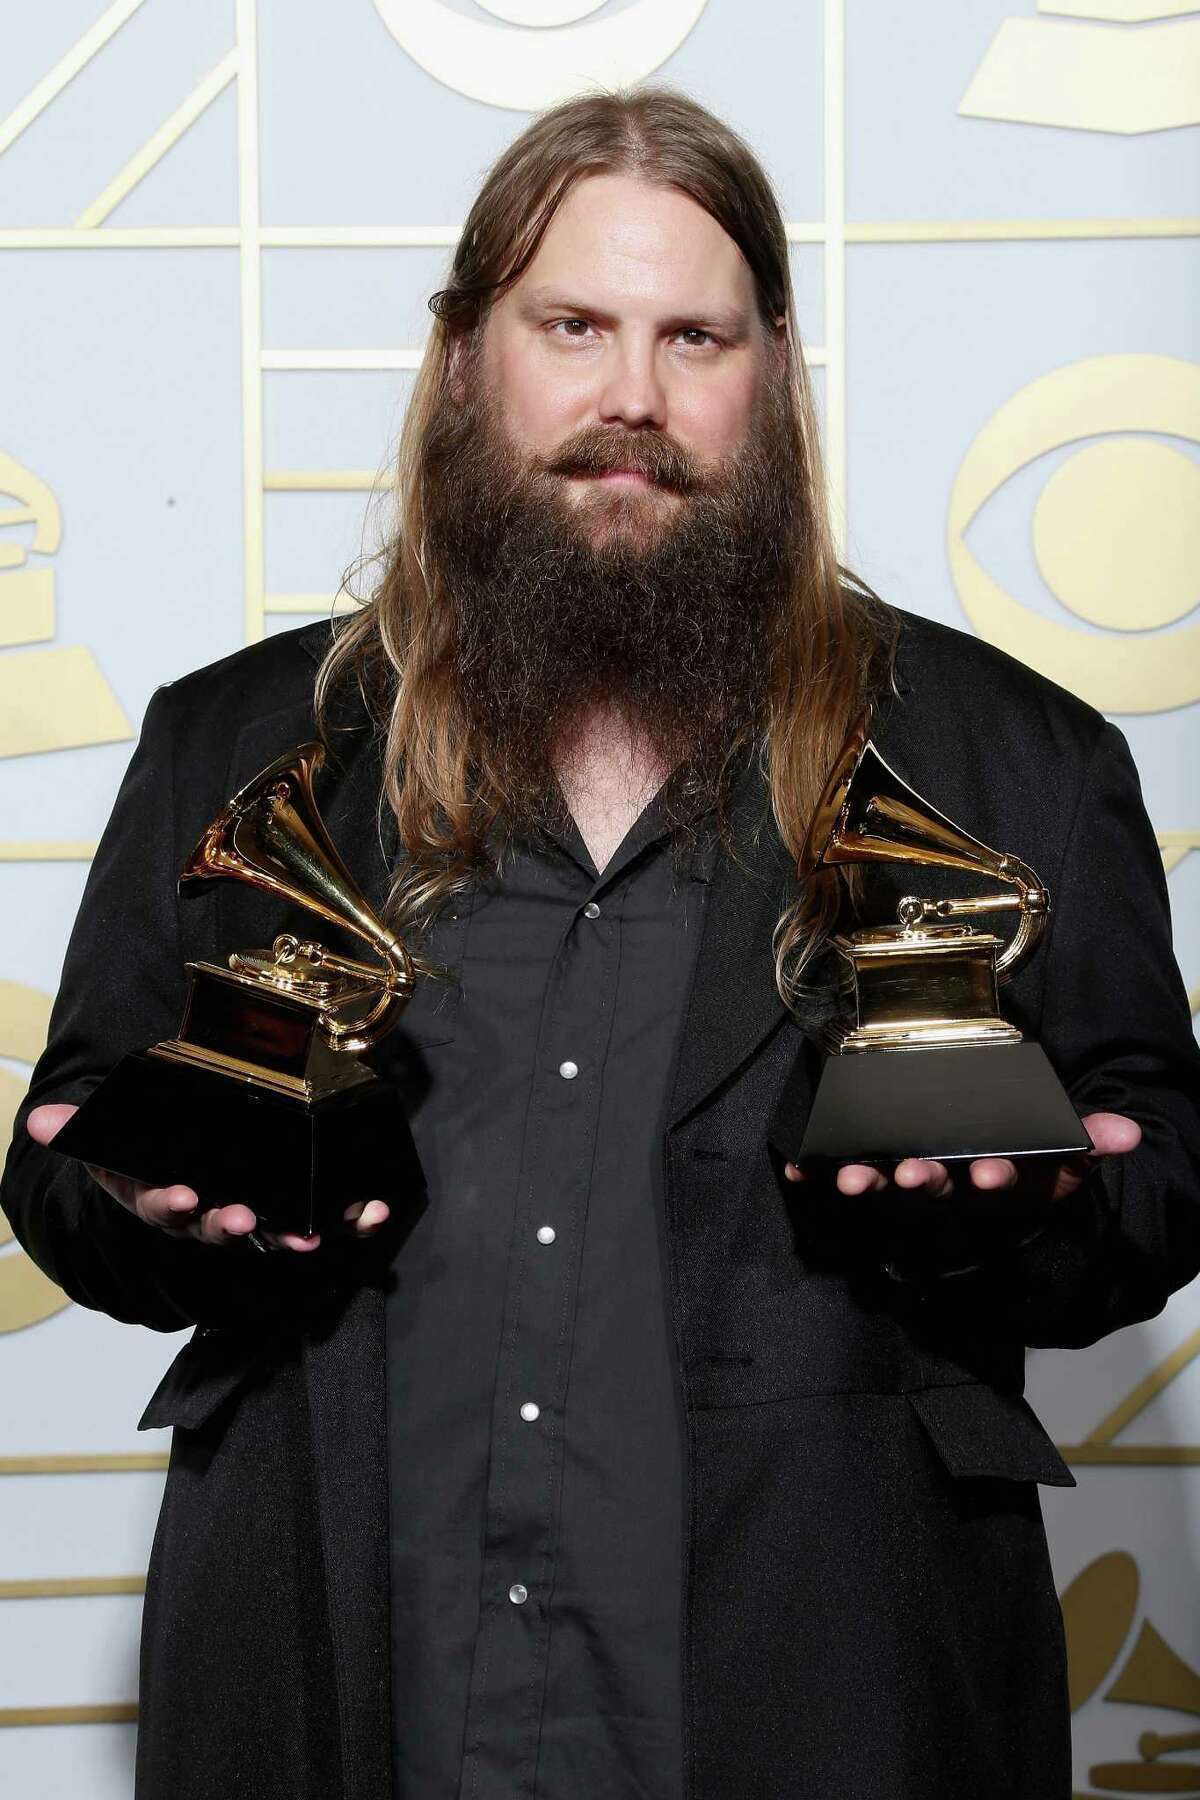 LOS ANGELES, CA - FEBRUARY 15: Musician Chris Stapleton, winner of Best Country Album and Best Country Solo Performance for 'Traveller,' poses in the press room during The 58th GRAMMY Awards at Staples Center on February 15, 2016 in Los Angeles, California. (Photo by Frederick M. Brown/Getty Images for NARAS)